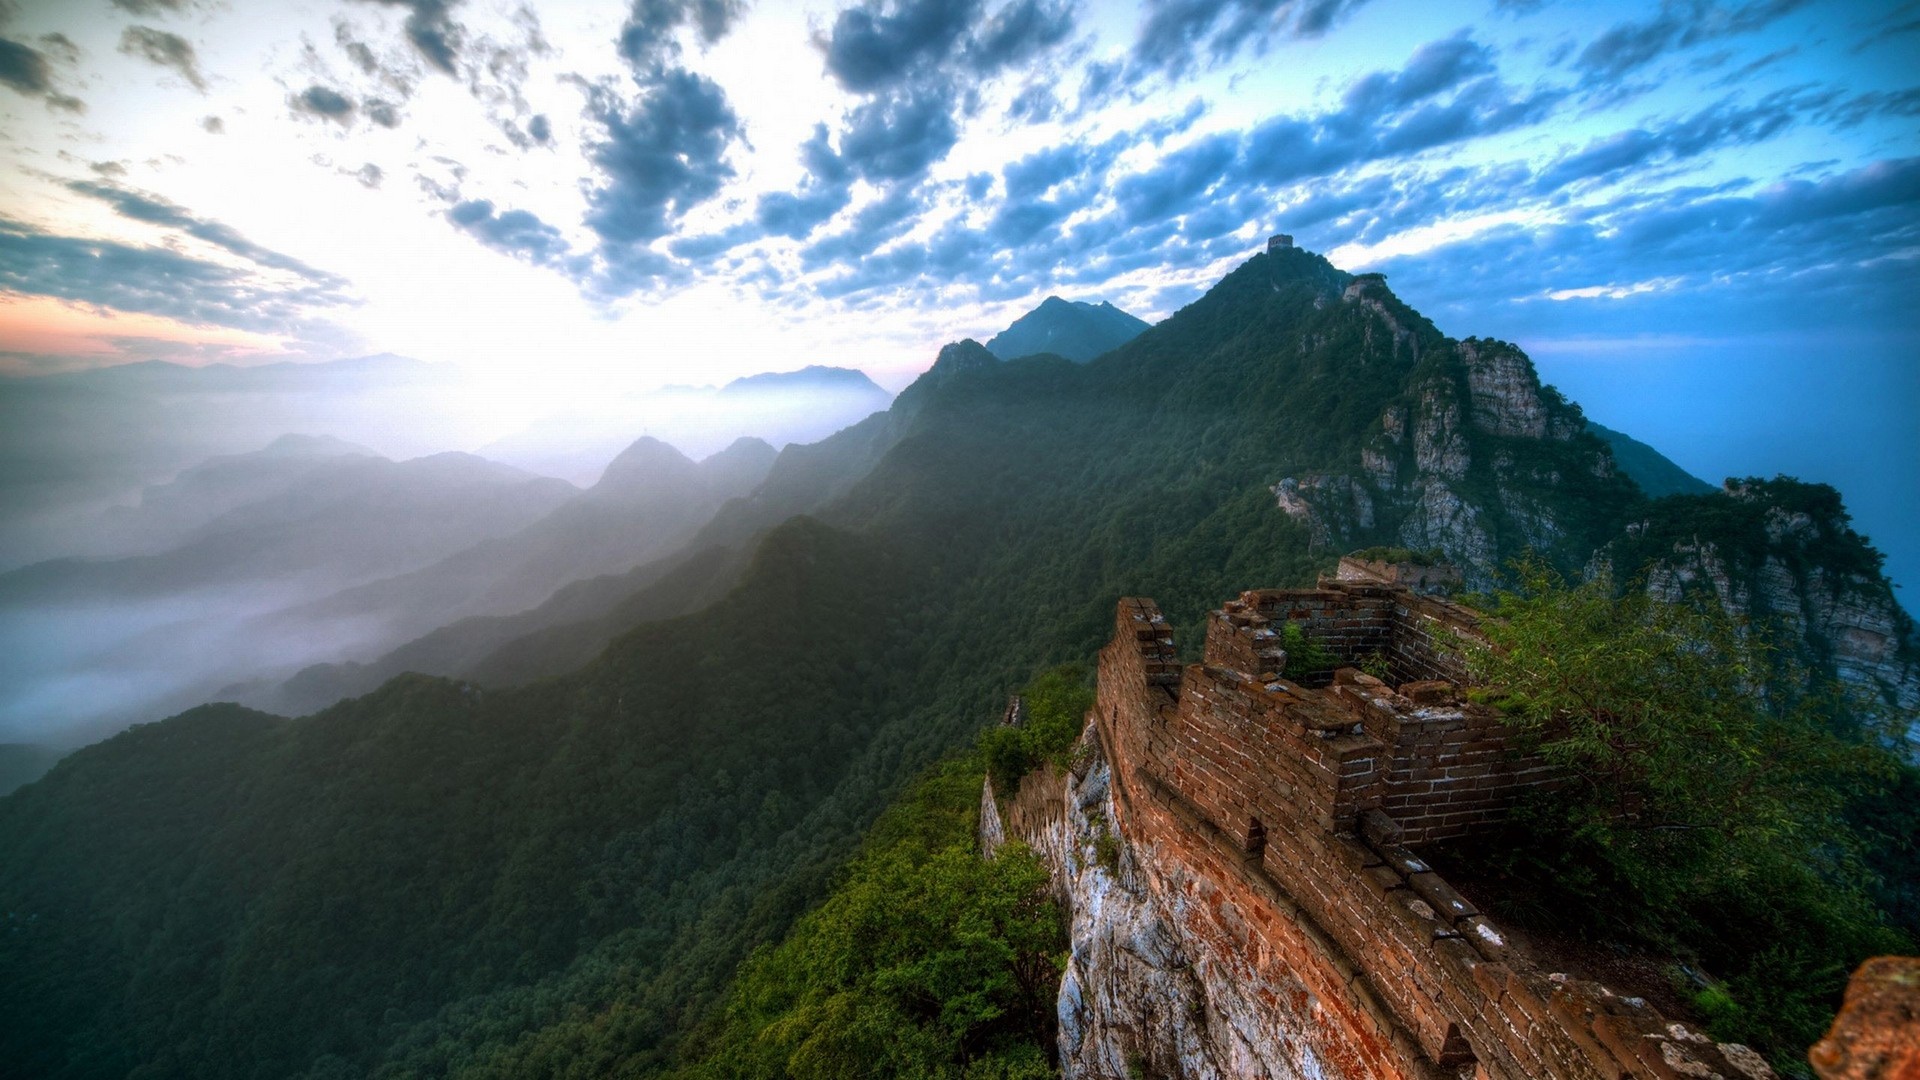 General 1920x1080 nature landscape mountains clouds China Asia Great Wall of China